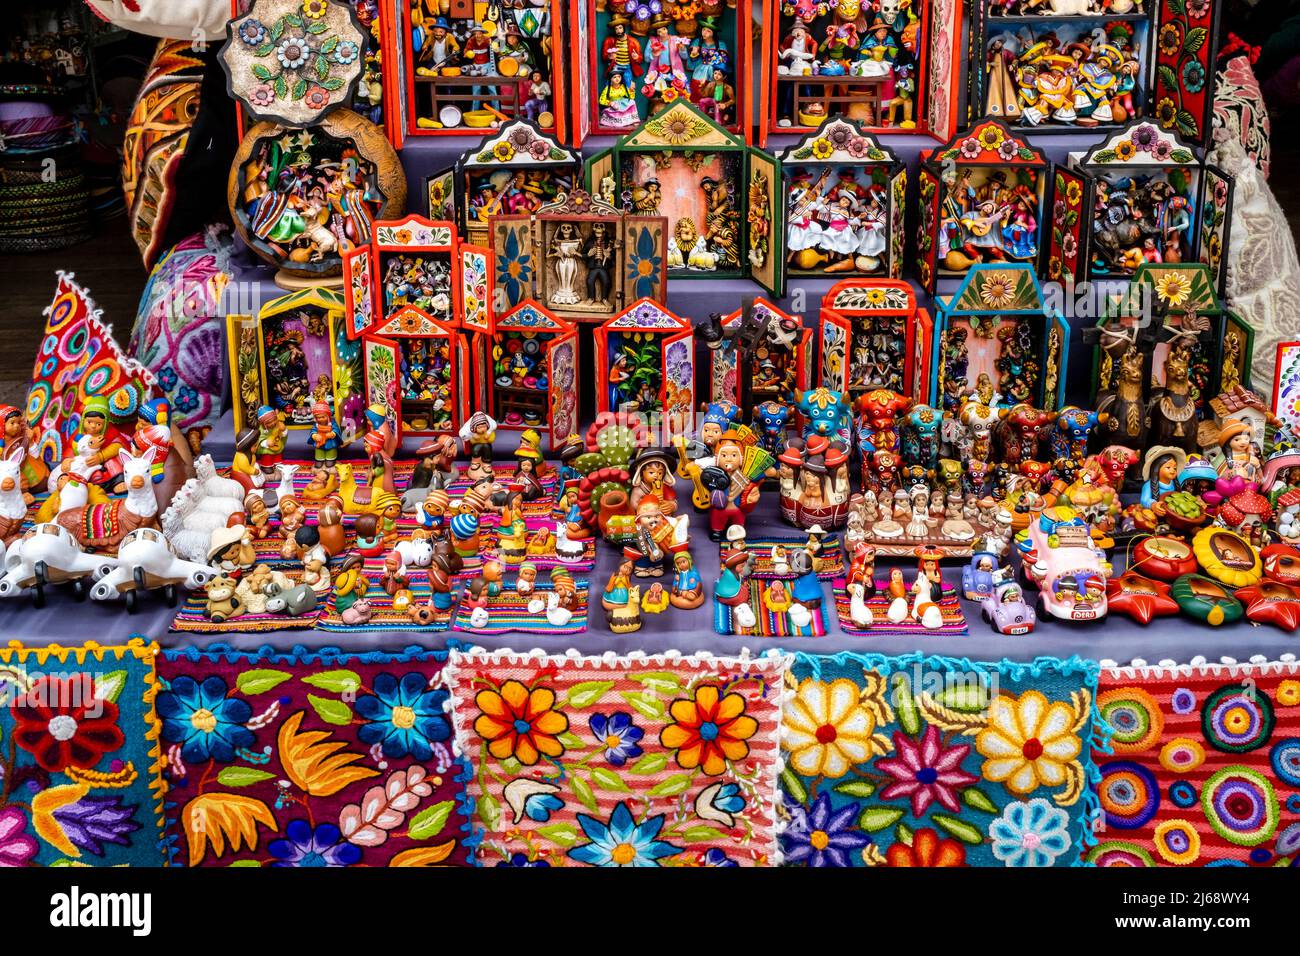 Colourful Souvenirs For Sale At The Sunday Market At Pisac, The Sacred Valley, Calca Province, Peru. Stock Photo